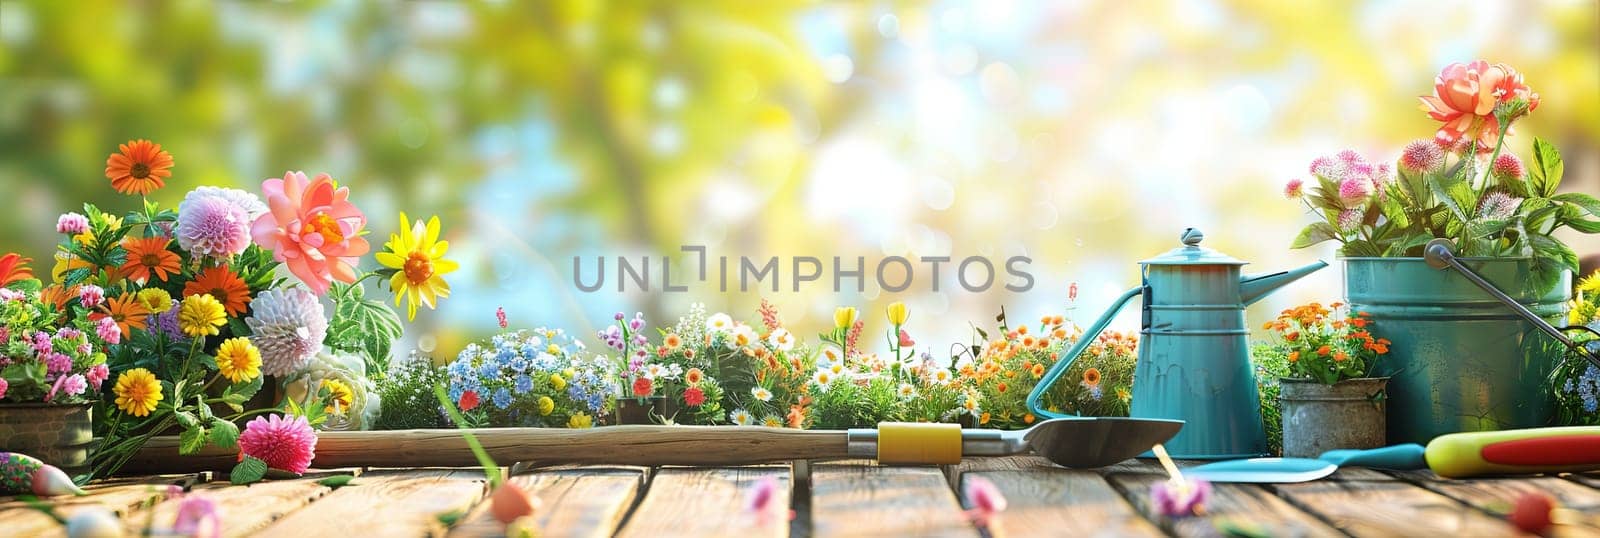 A wooden table displaying an assortment of colorful flowers and garden tools against a blurred natural background.